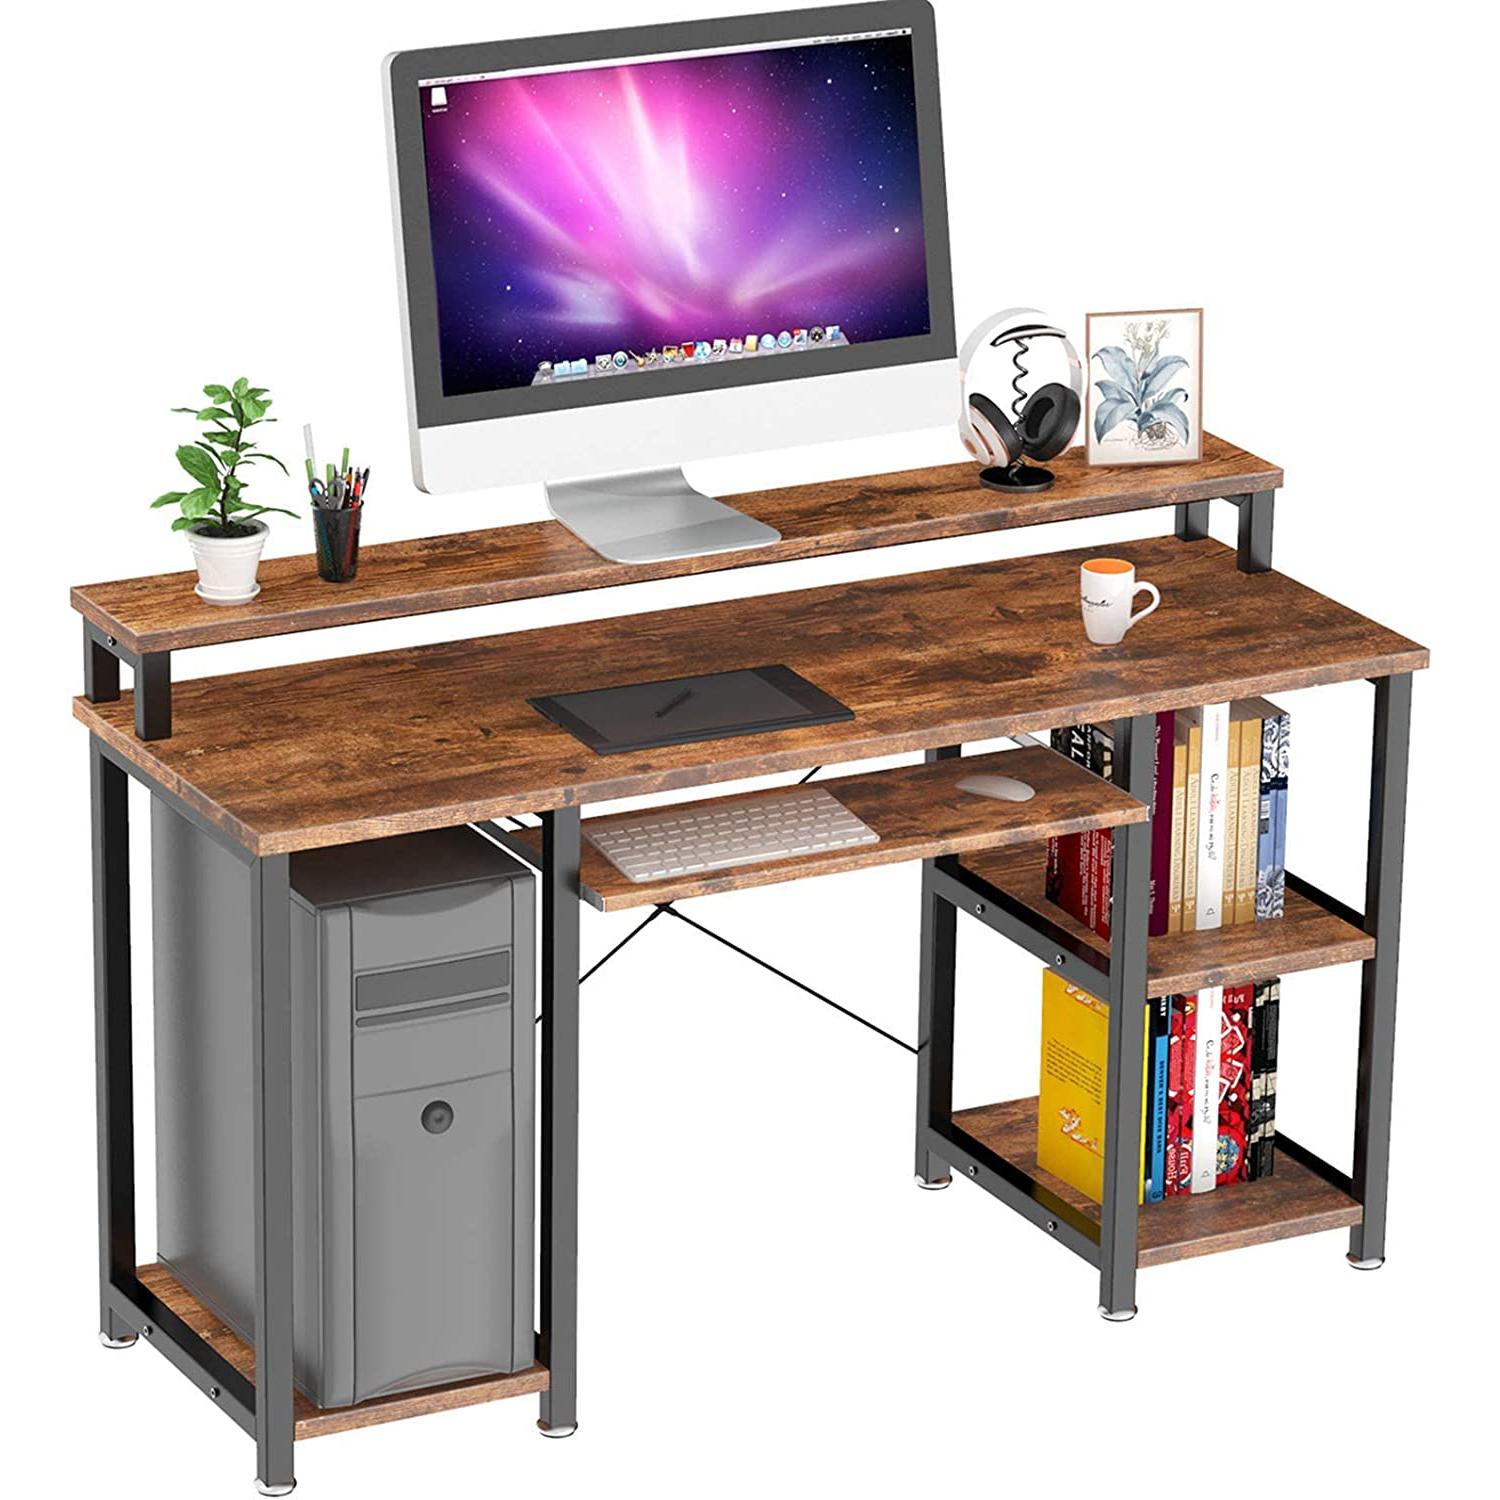 Computer Desk with Storage Shelves and Monitor Stand for $79.39 Shipped